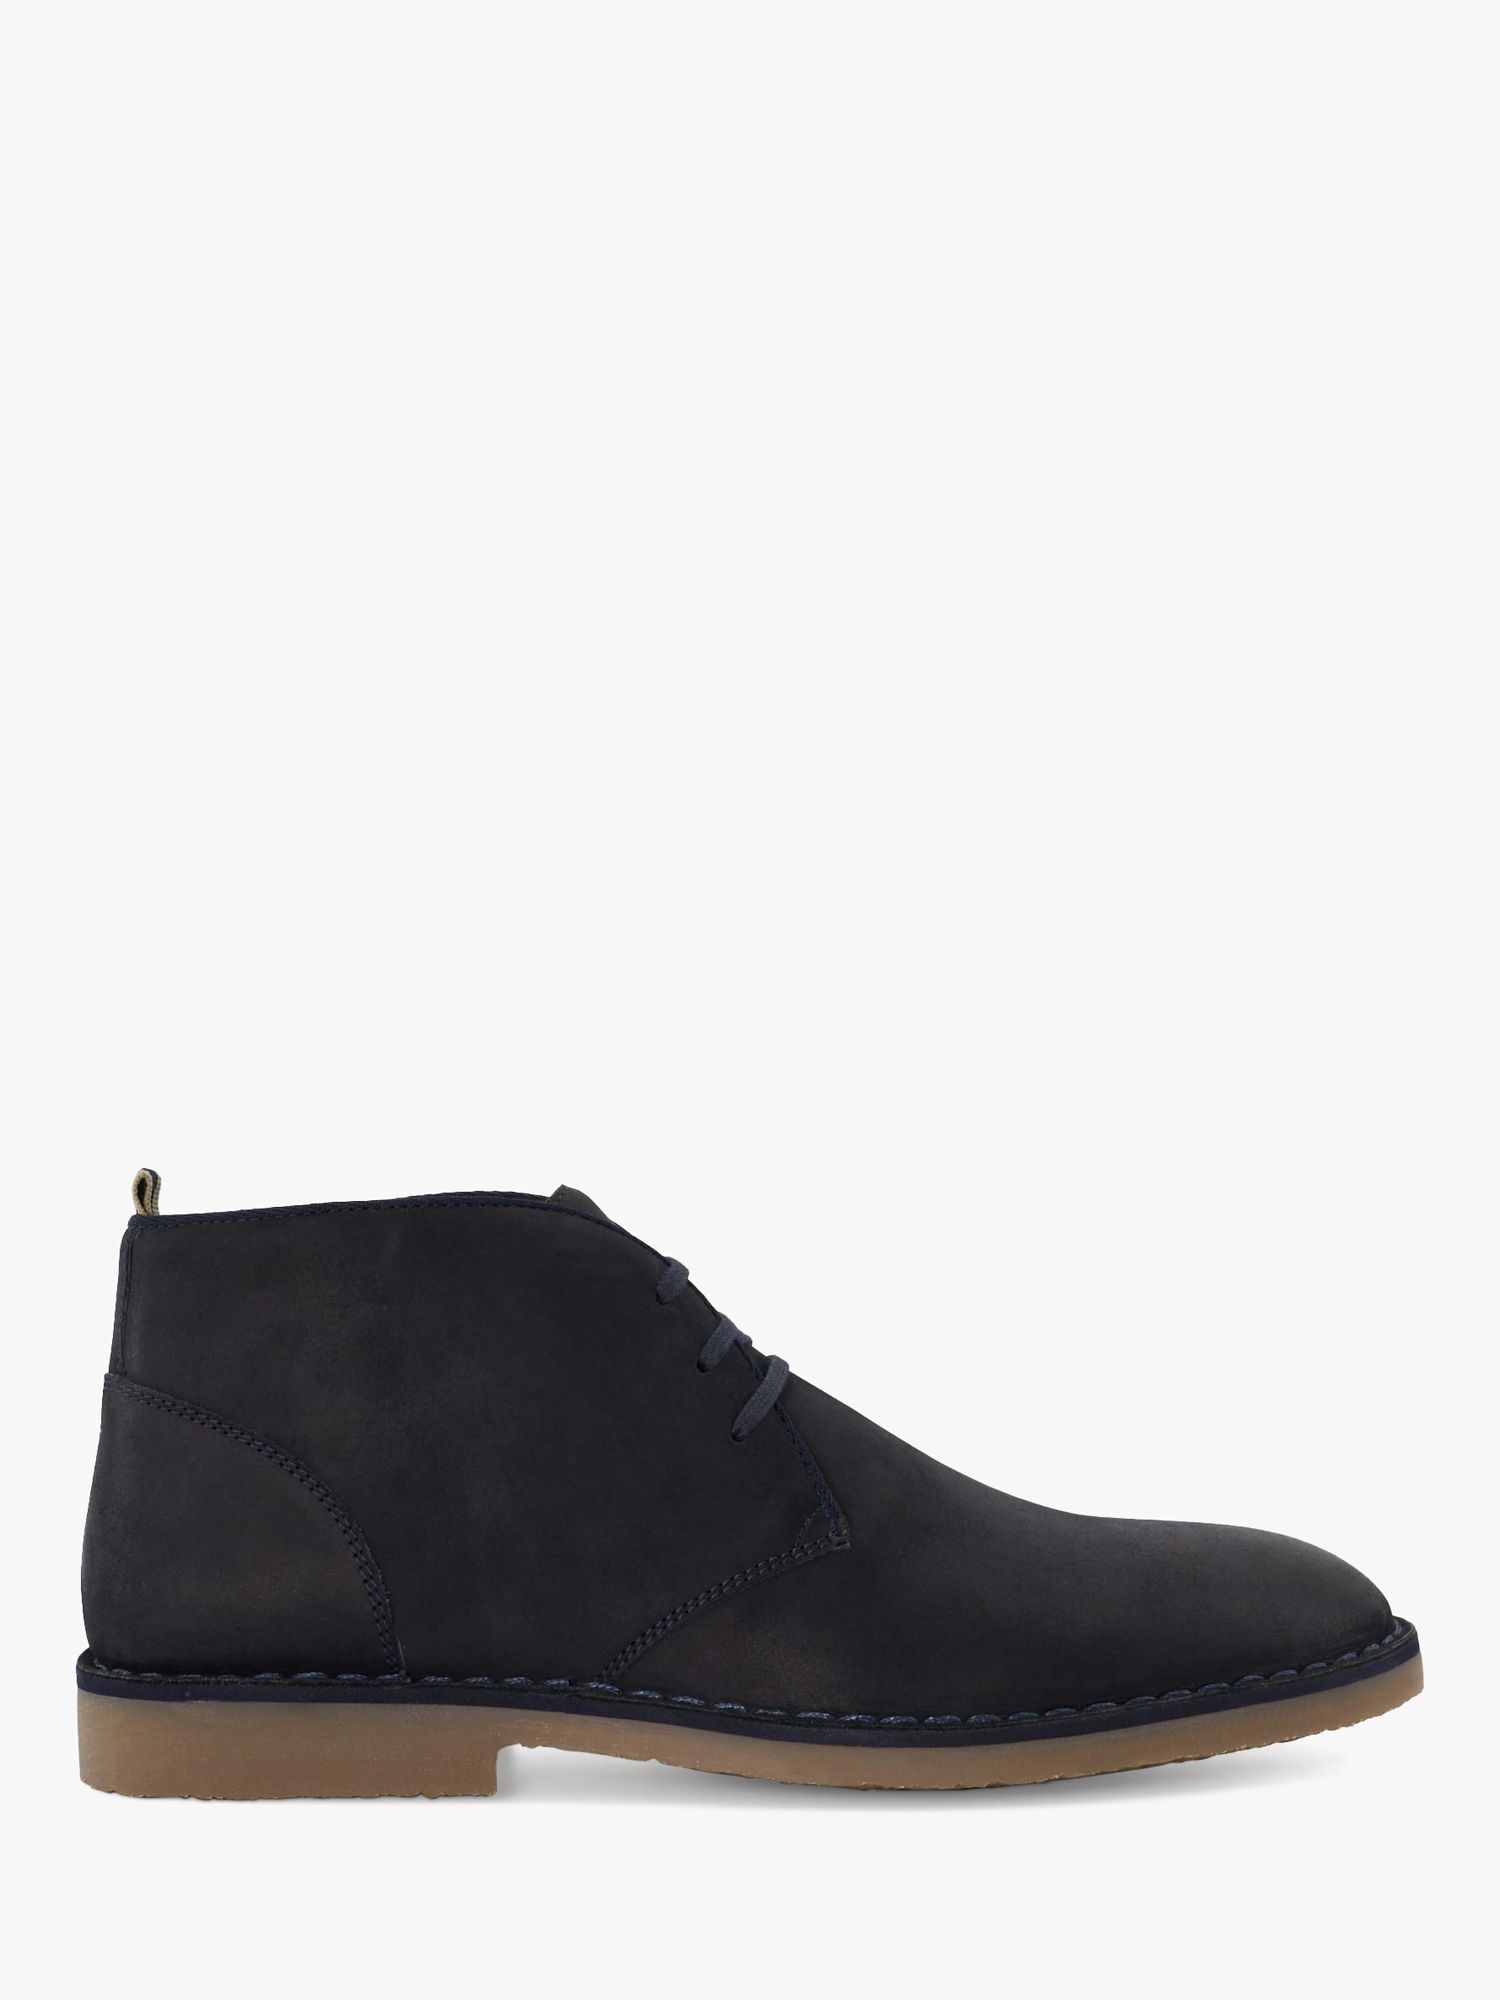 Dune Cashed Lace Up Chukka Boots, Navy at John Lewis & Partners